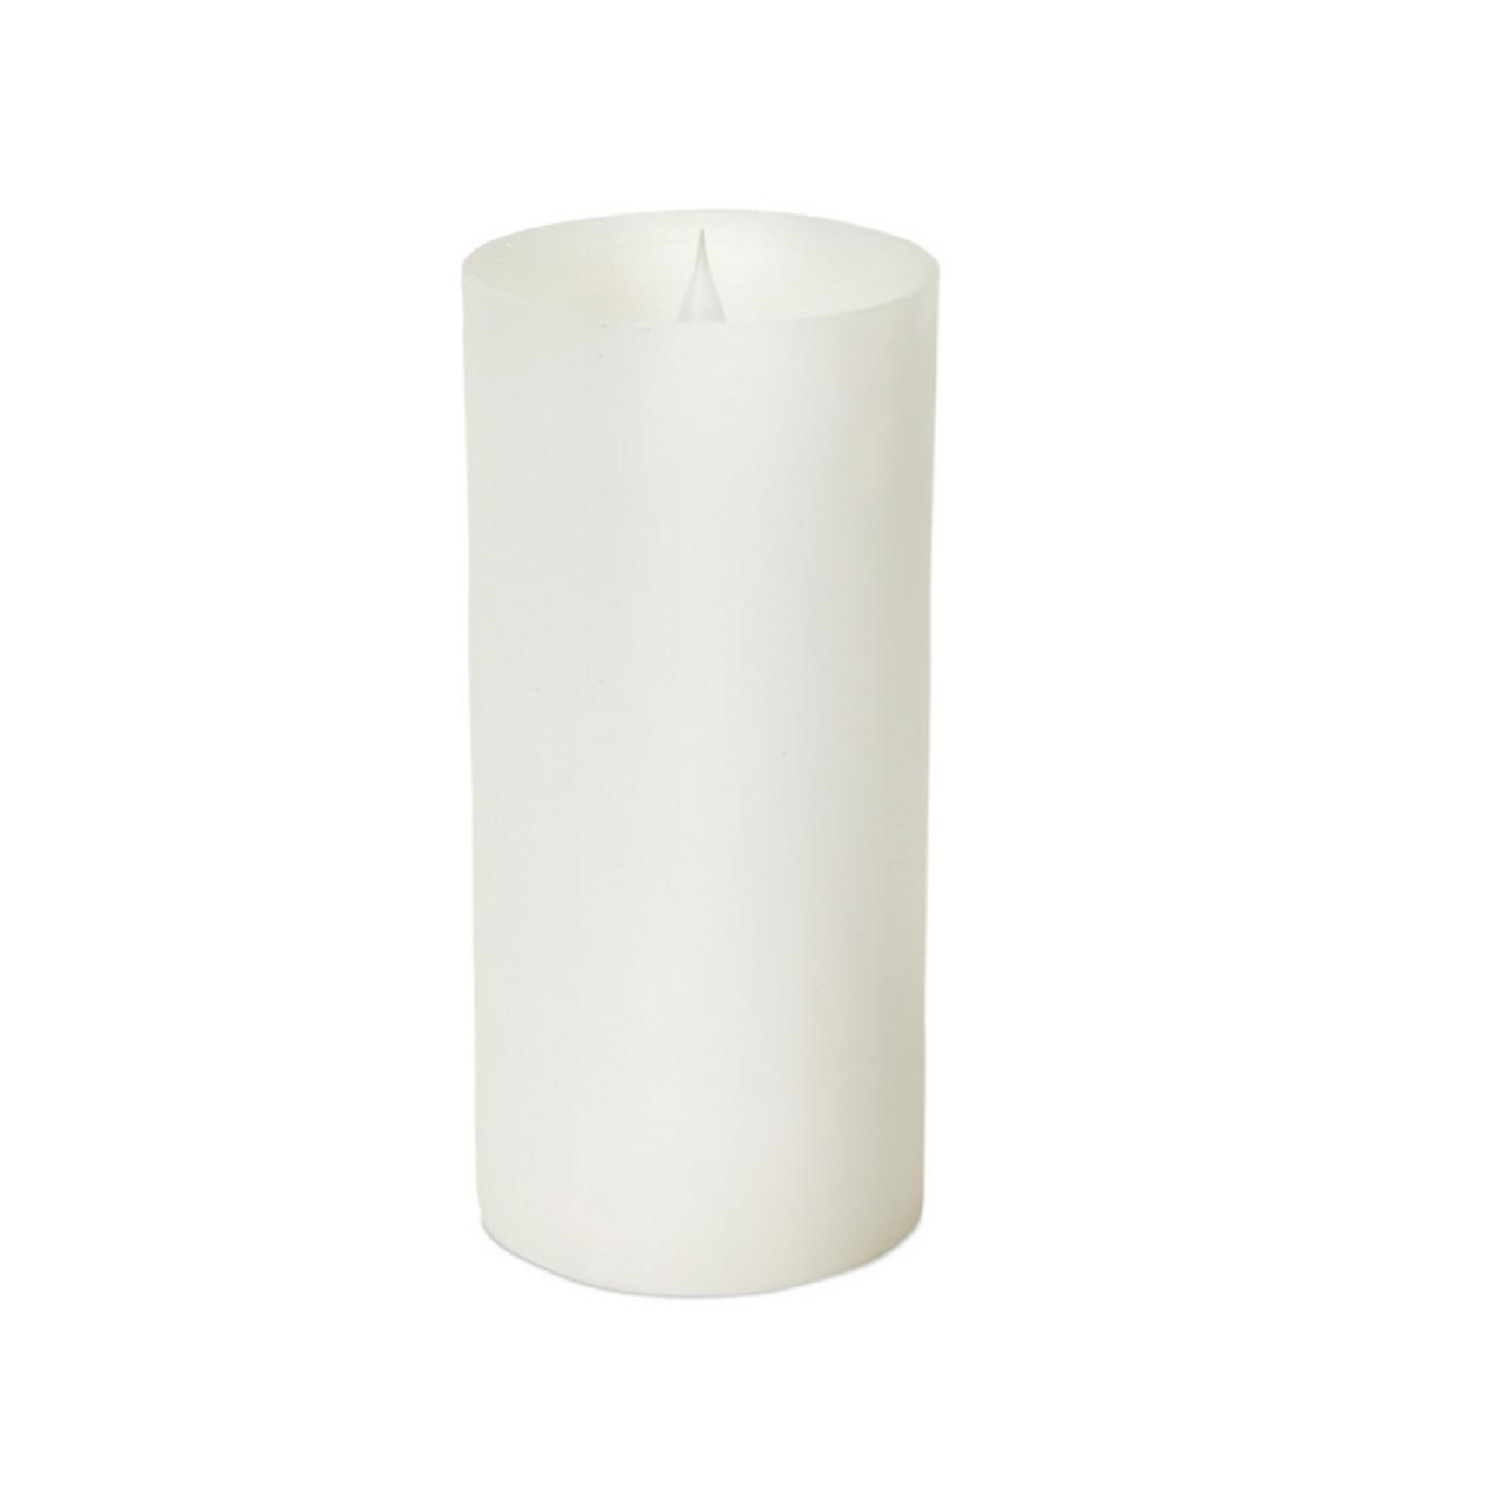 9" Battery Operated Solid White Flameless LED Pillar Candle with Moving Flame